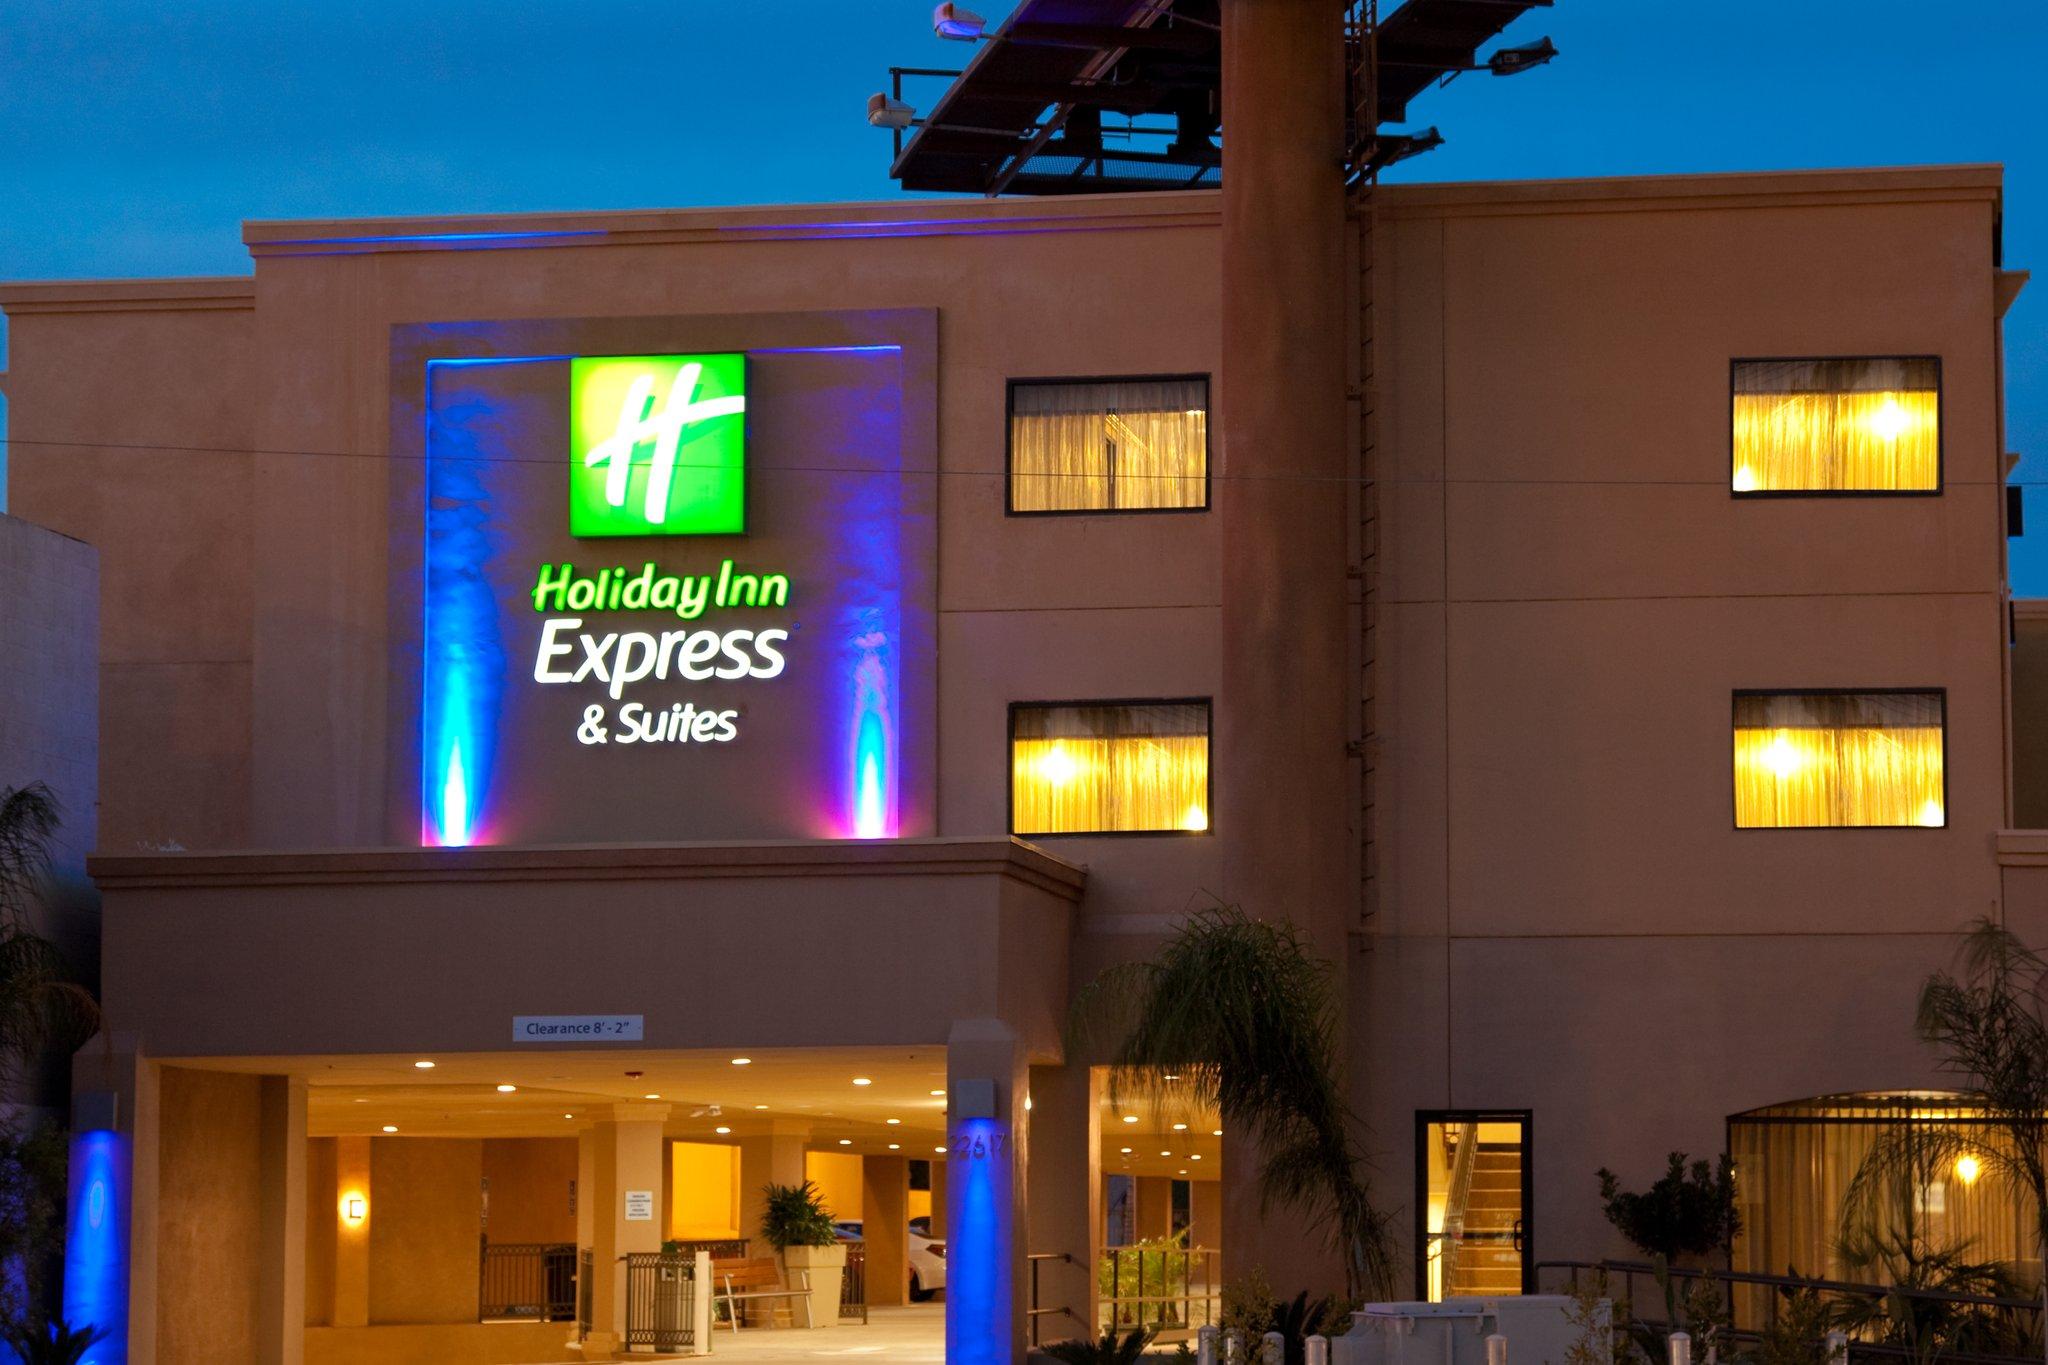 Holiday Inn Express Hotel & Suites Woodland Hills in Woodland Hills, CA